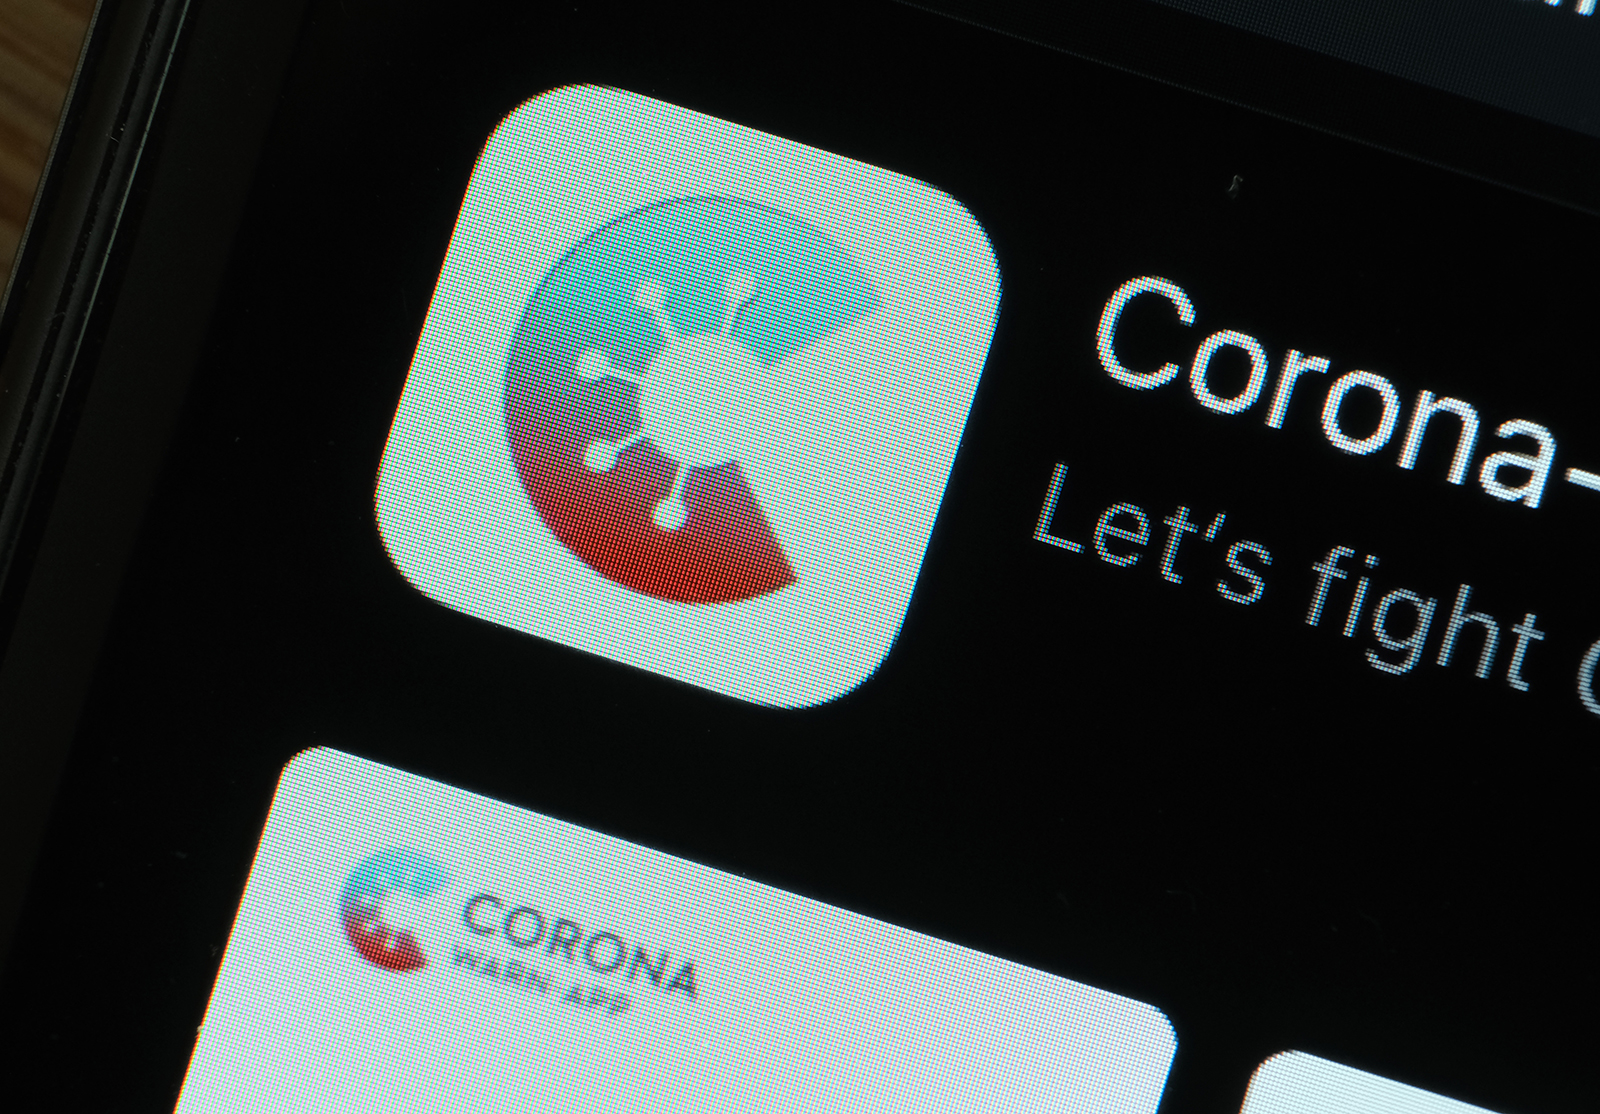 The newly-released "Corona-Warn-App" developed by the German government for tracking Covid-19 infections is seen for download on an Apple iPhone on June 16, in Berlin, Germany. 